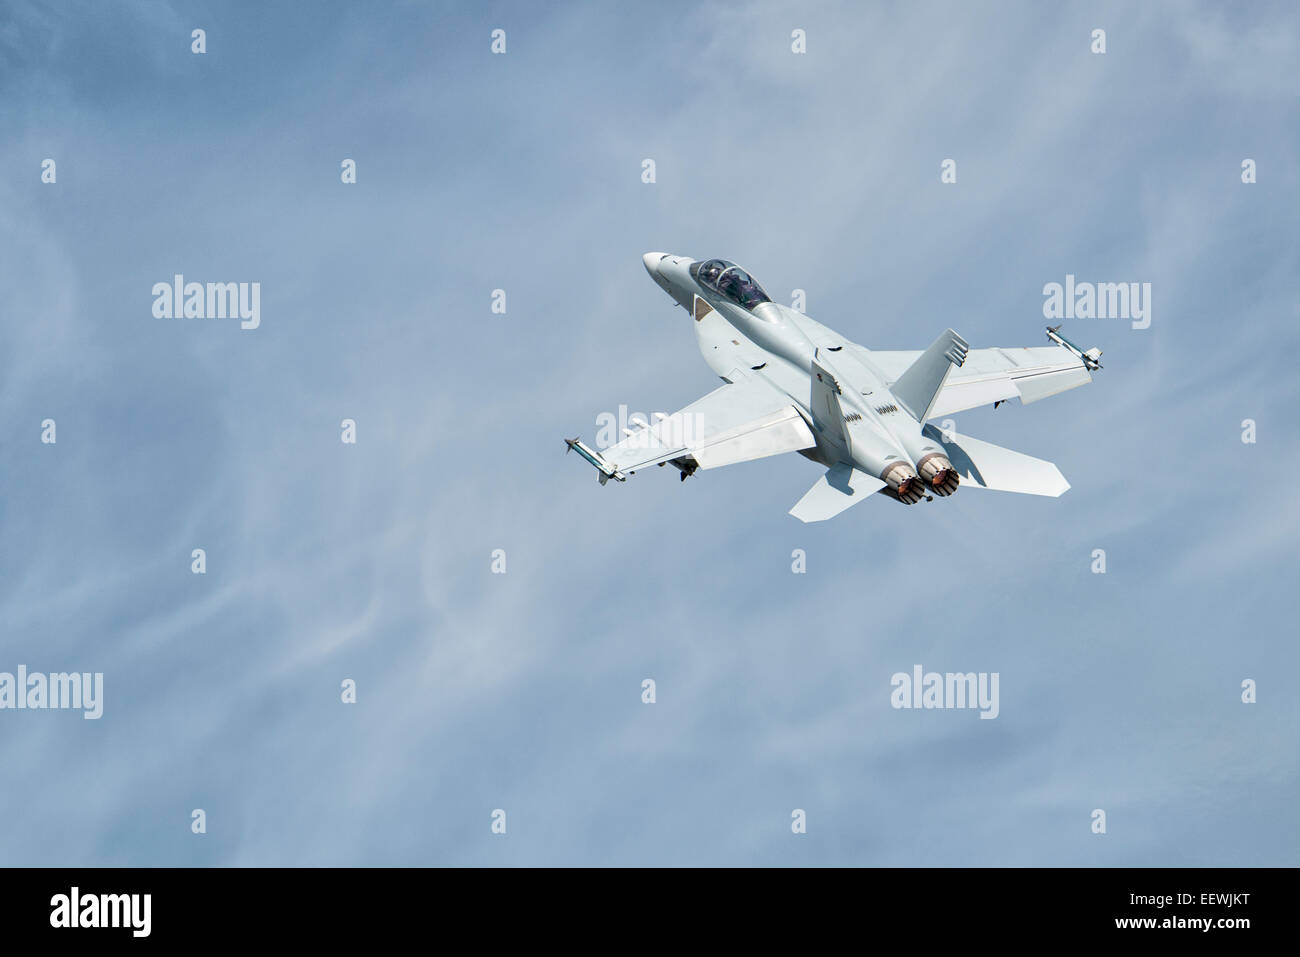 Boeing F/A-18F Super Hornet multi role fighter jet displays at the Royal International Air Tattoo. Stock Photo